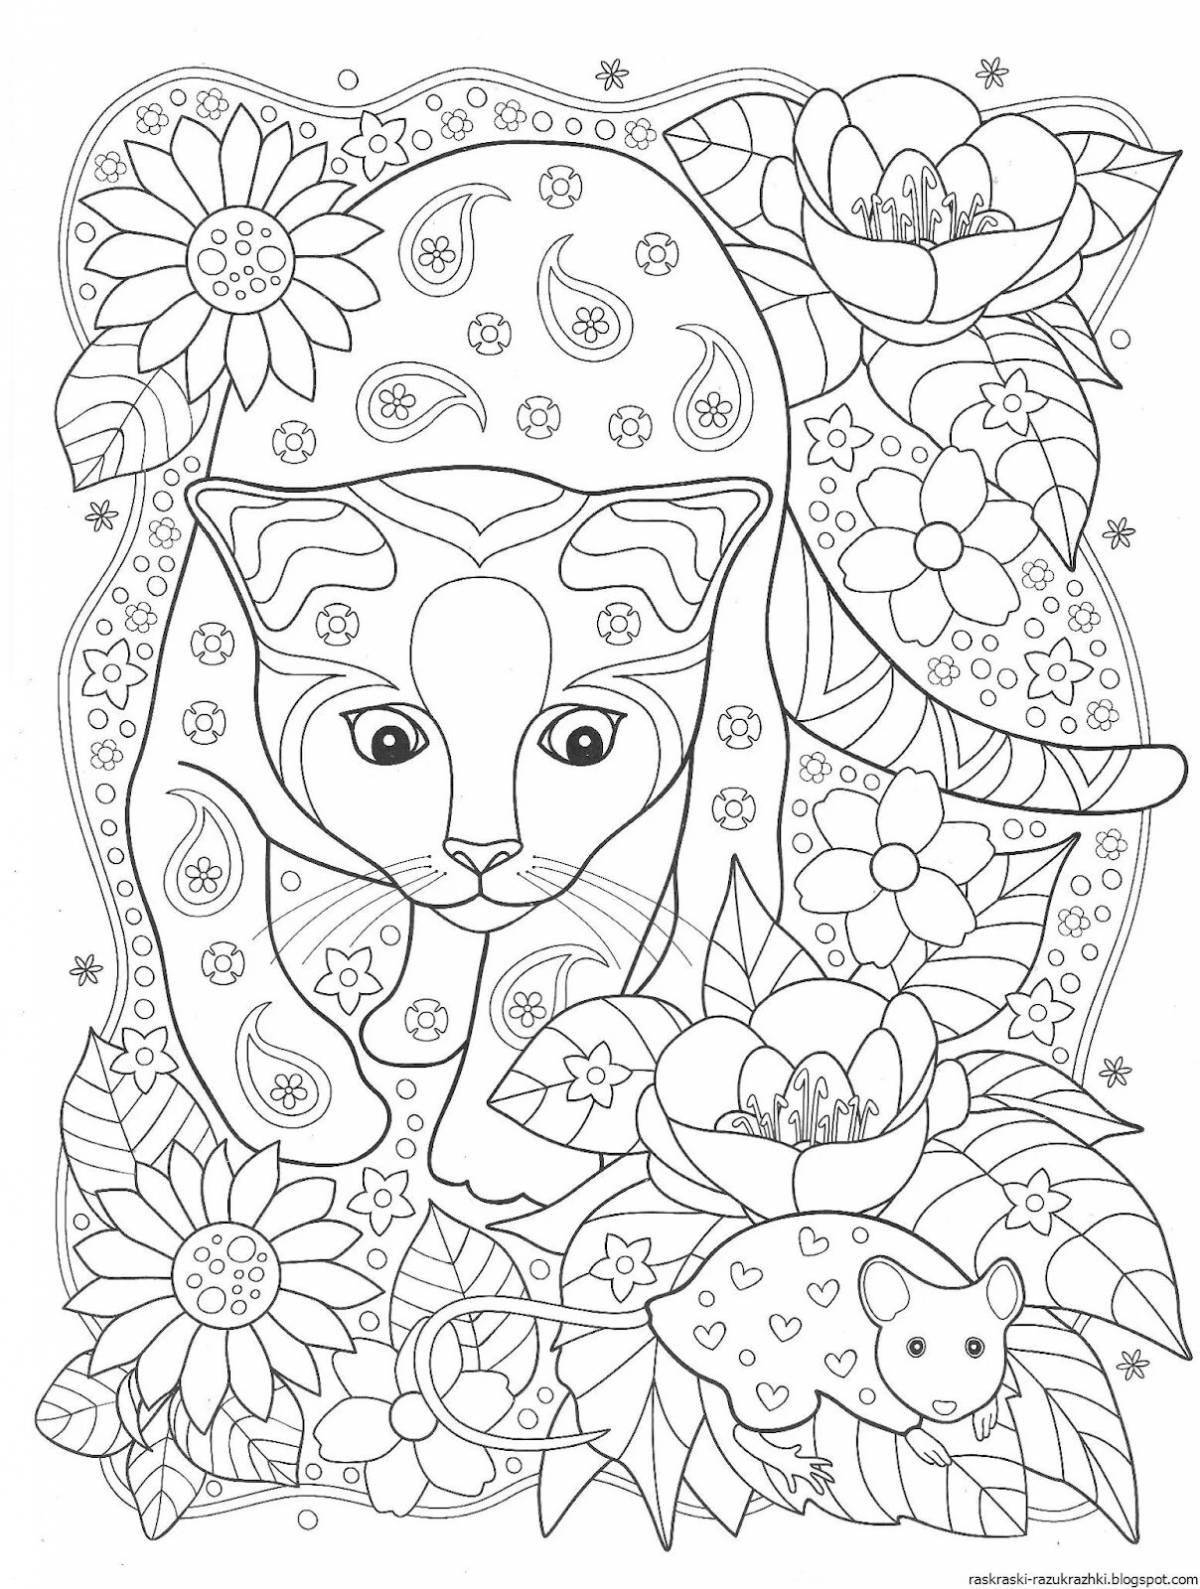 Great coloring for girls 10 years old - very beautiful animals